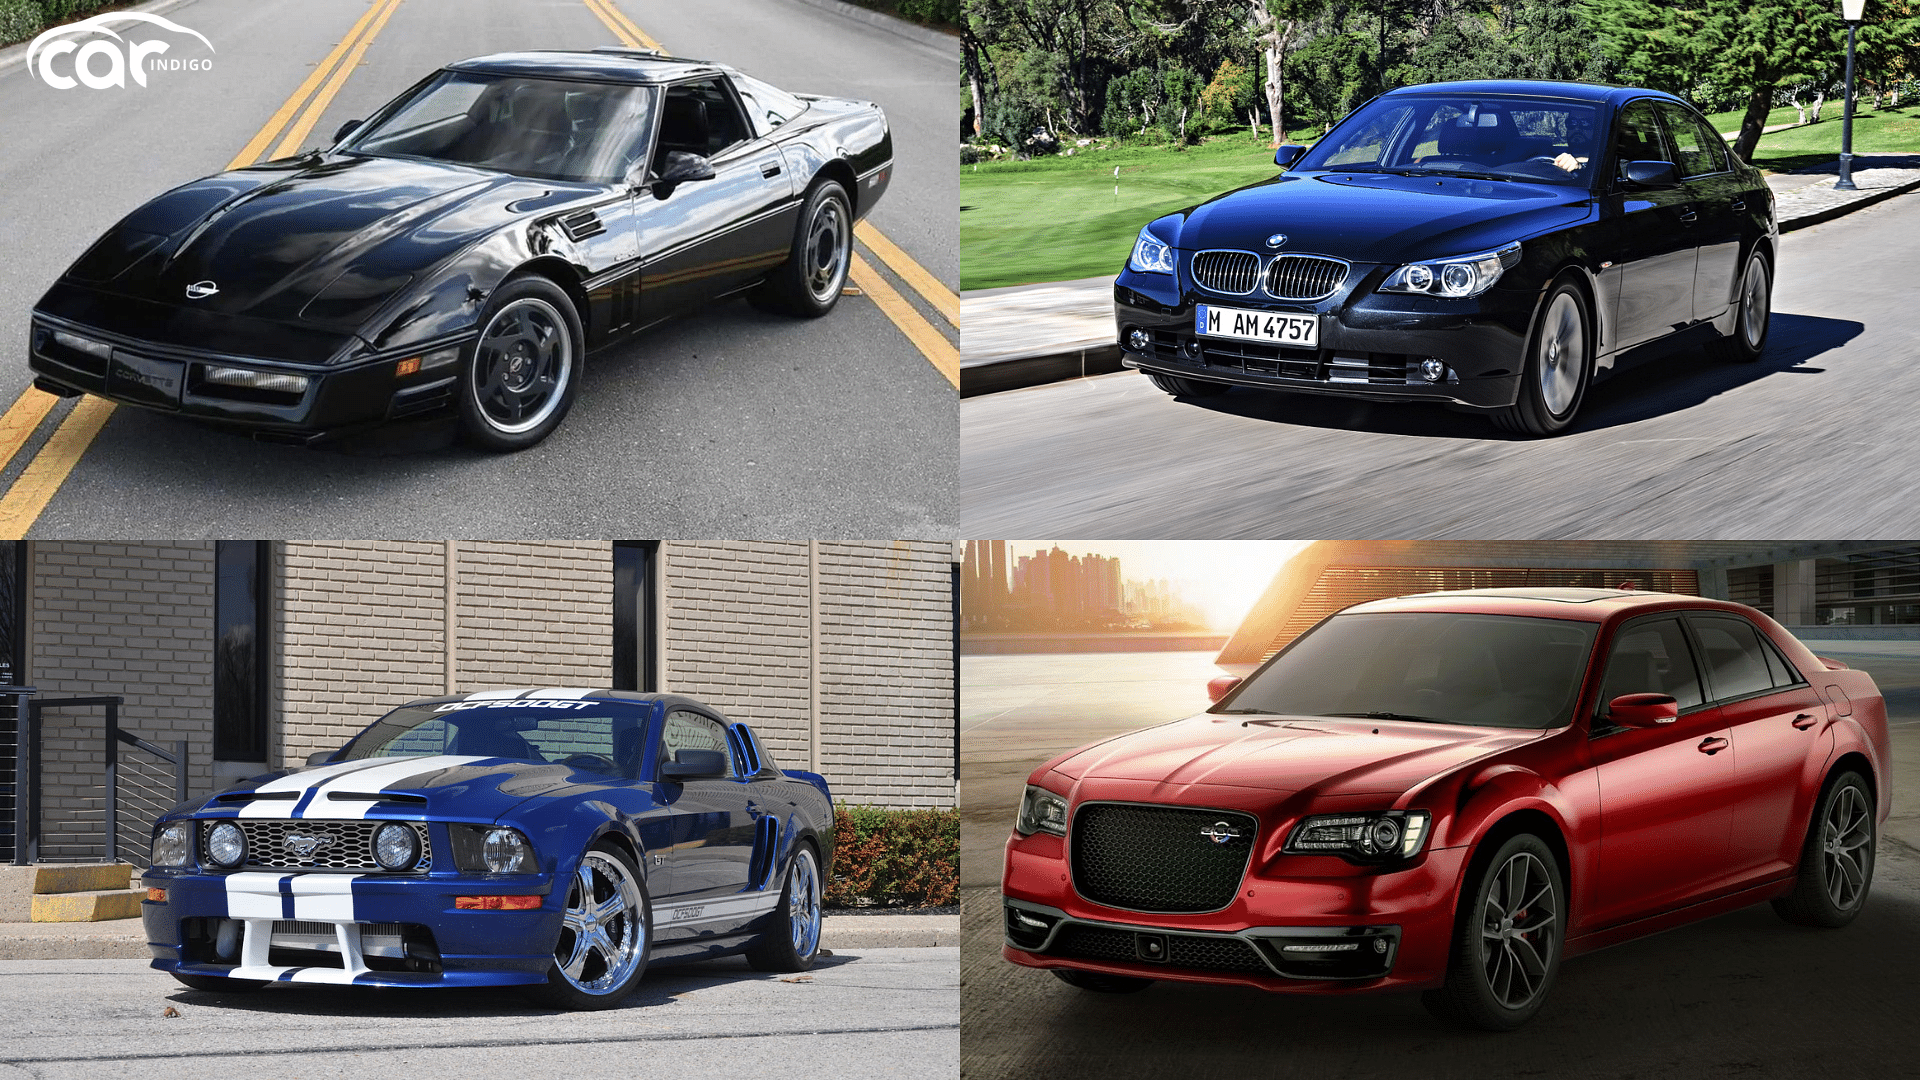 Take a Look At The Cheapest V8 Cars Under 10k's image